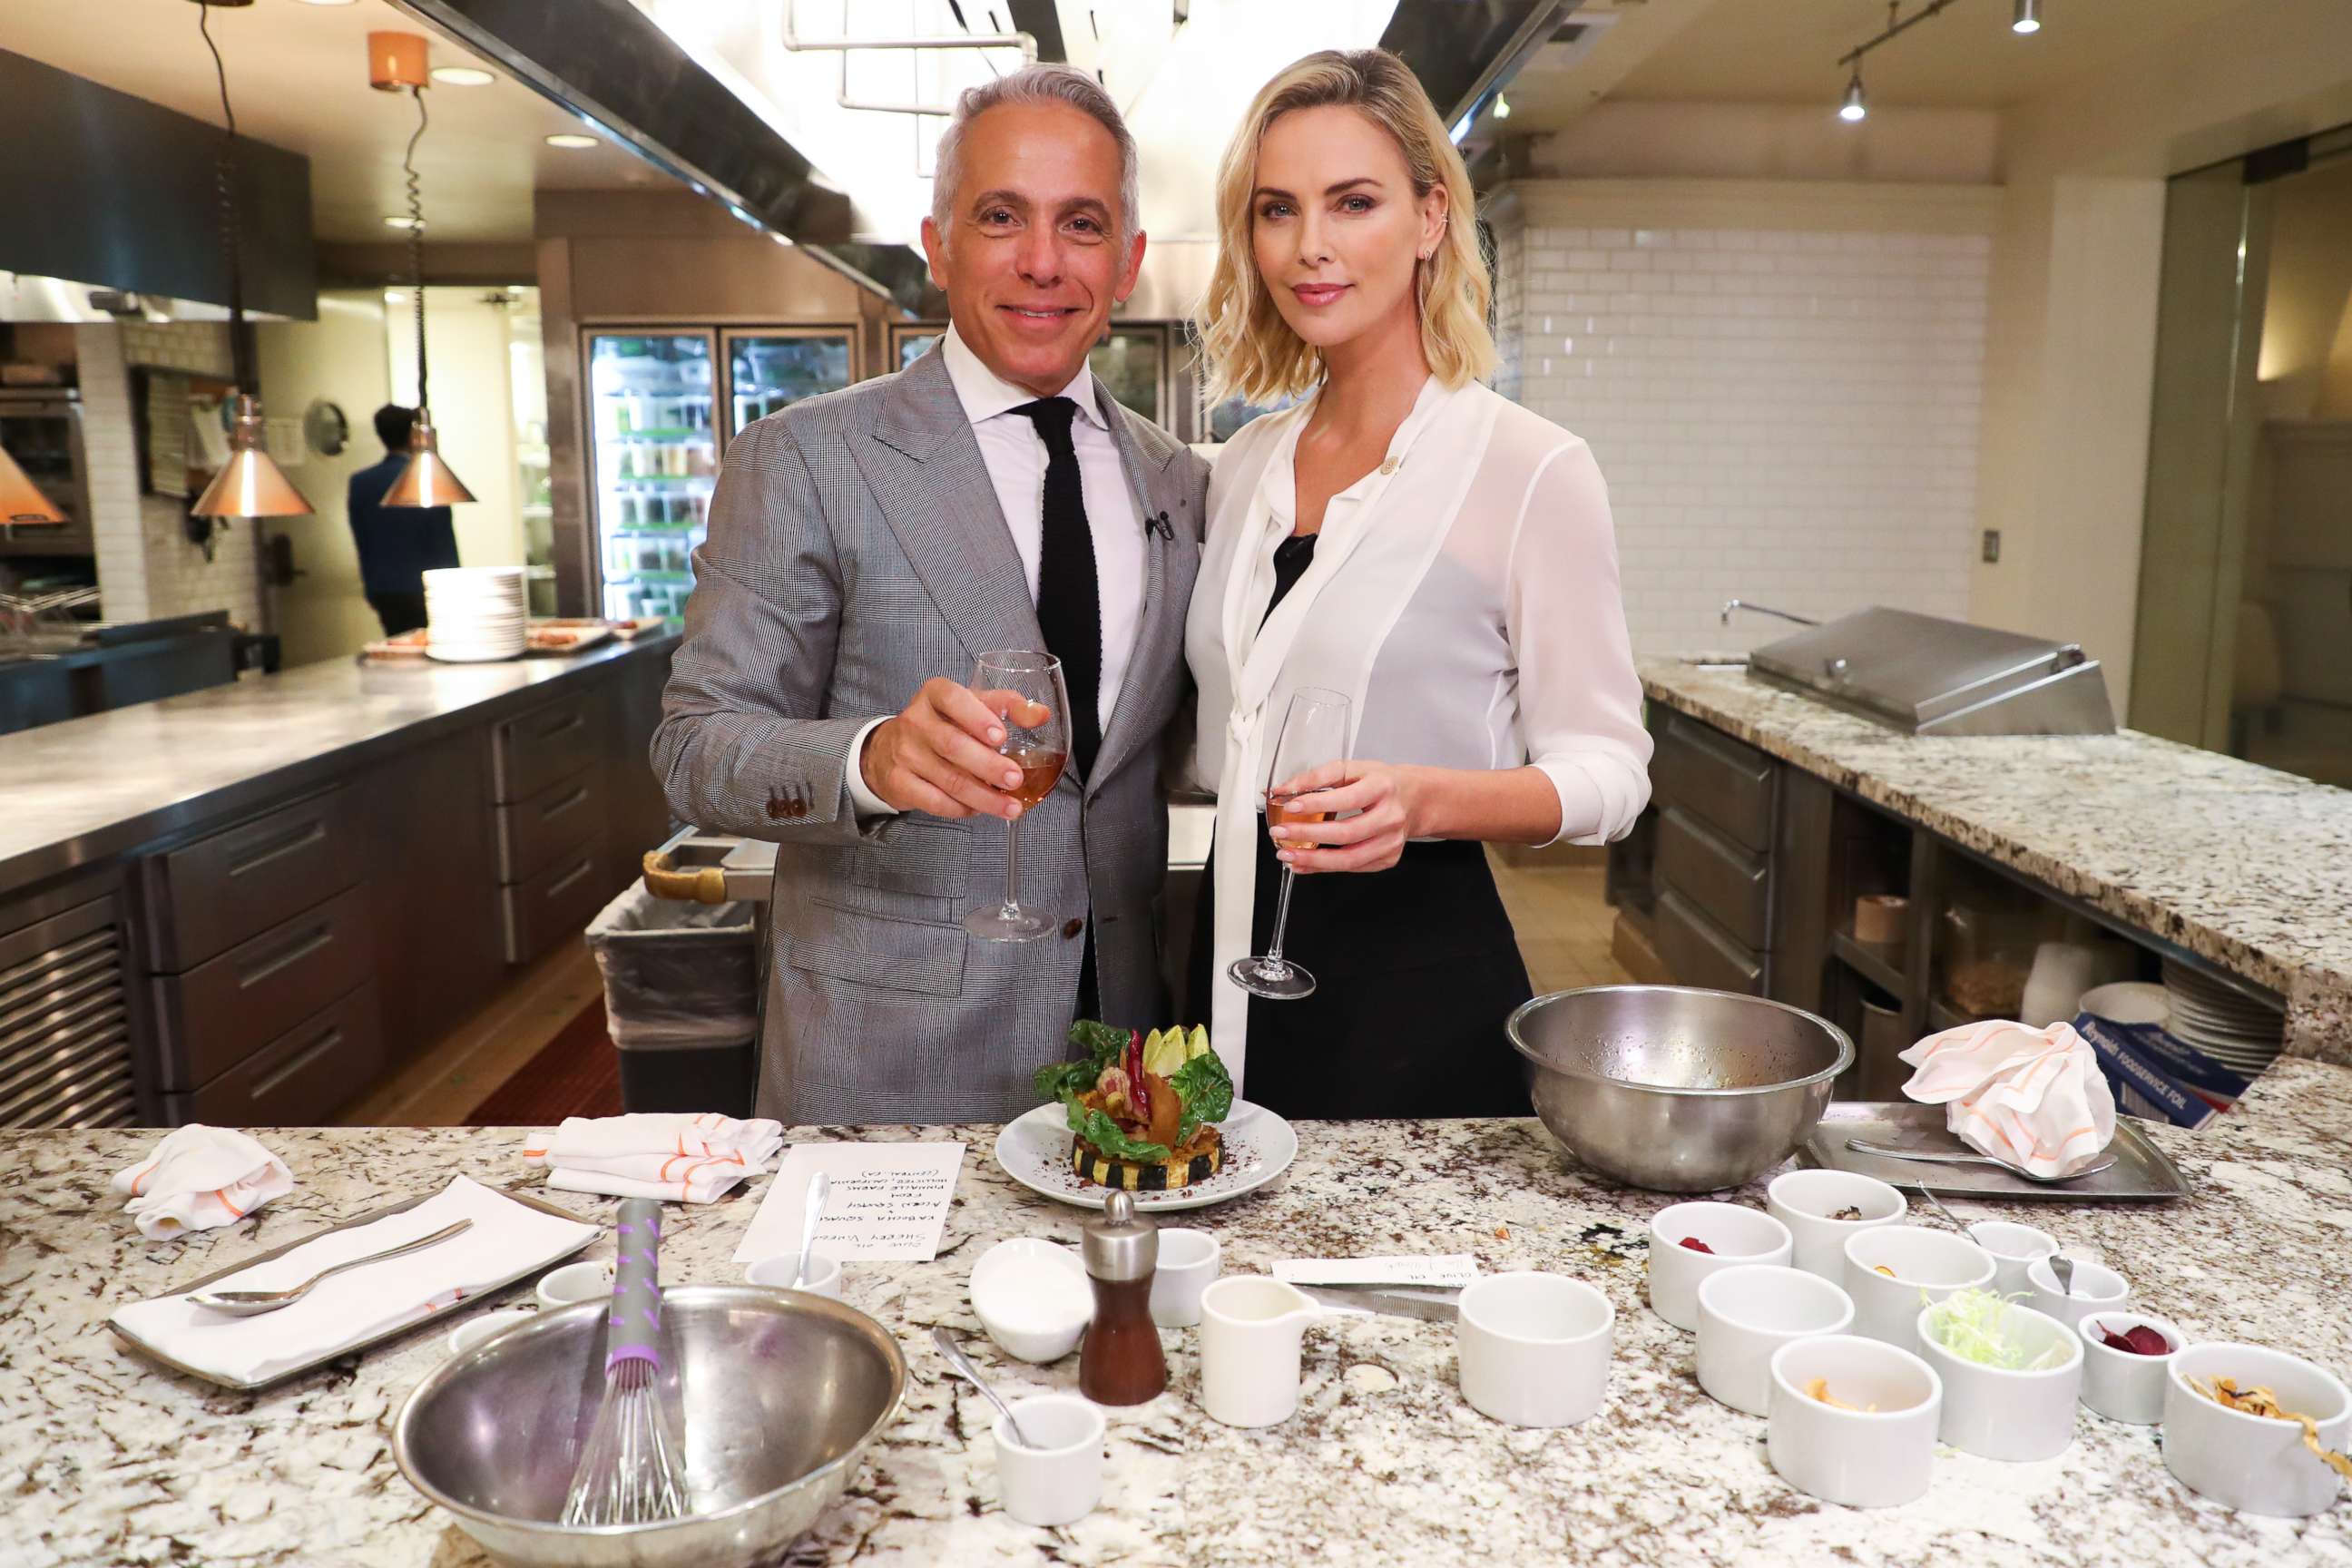 PHOTO: Charlize Theron and celebrity chef Geoffrey Zakarian celebrated the ten year anniversary of Theron's Africa Outreach Project charity at an event at Zakarian's restaurant at the Montage Hotel in Beverly Hills, Calif. 